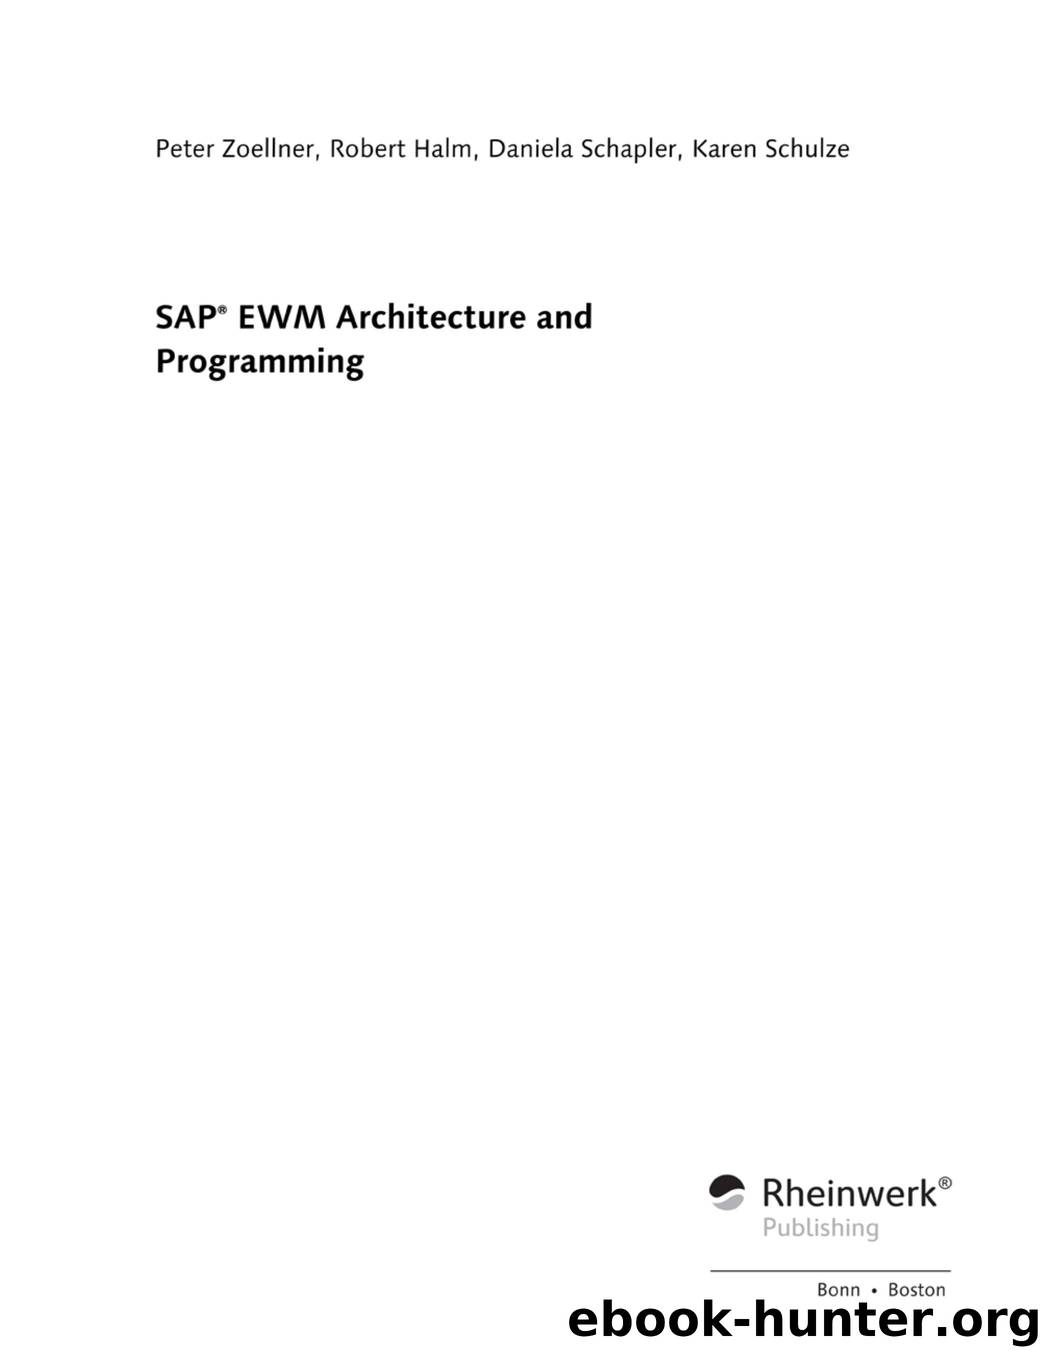 SAP EWM Architecture and Programming by Unknown